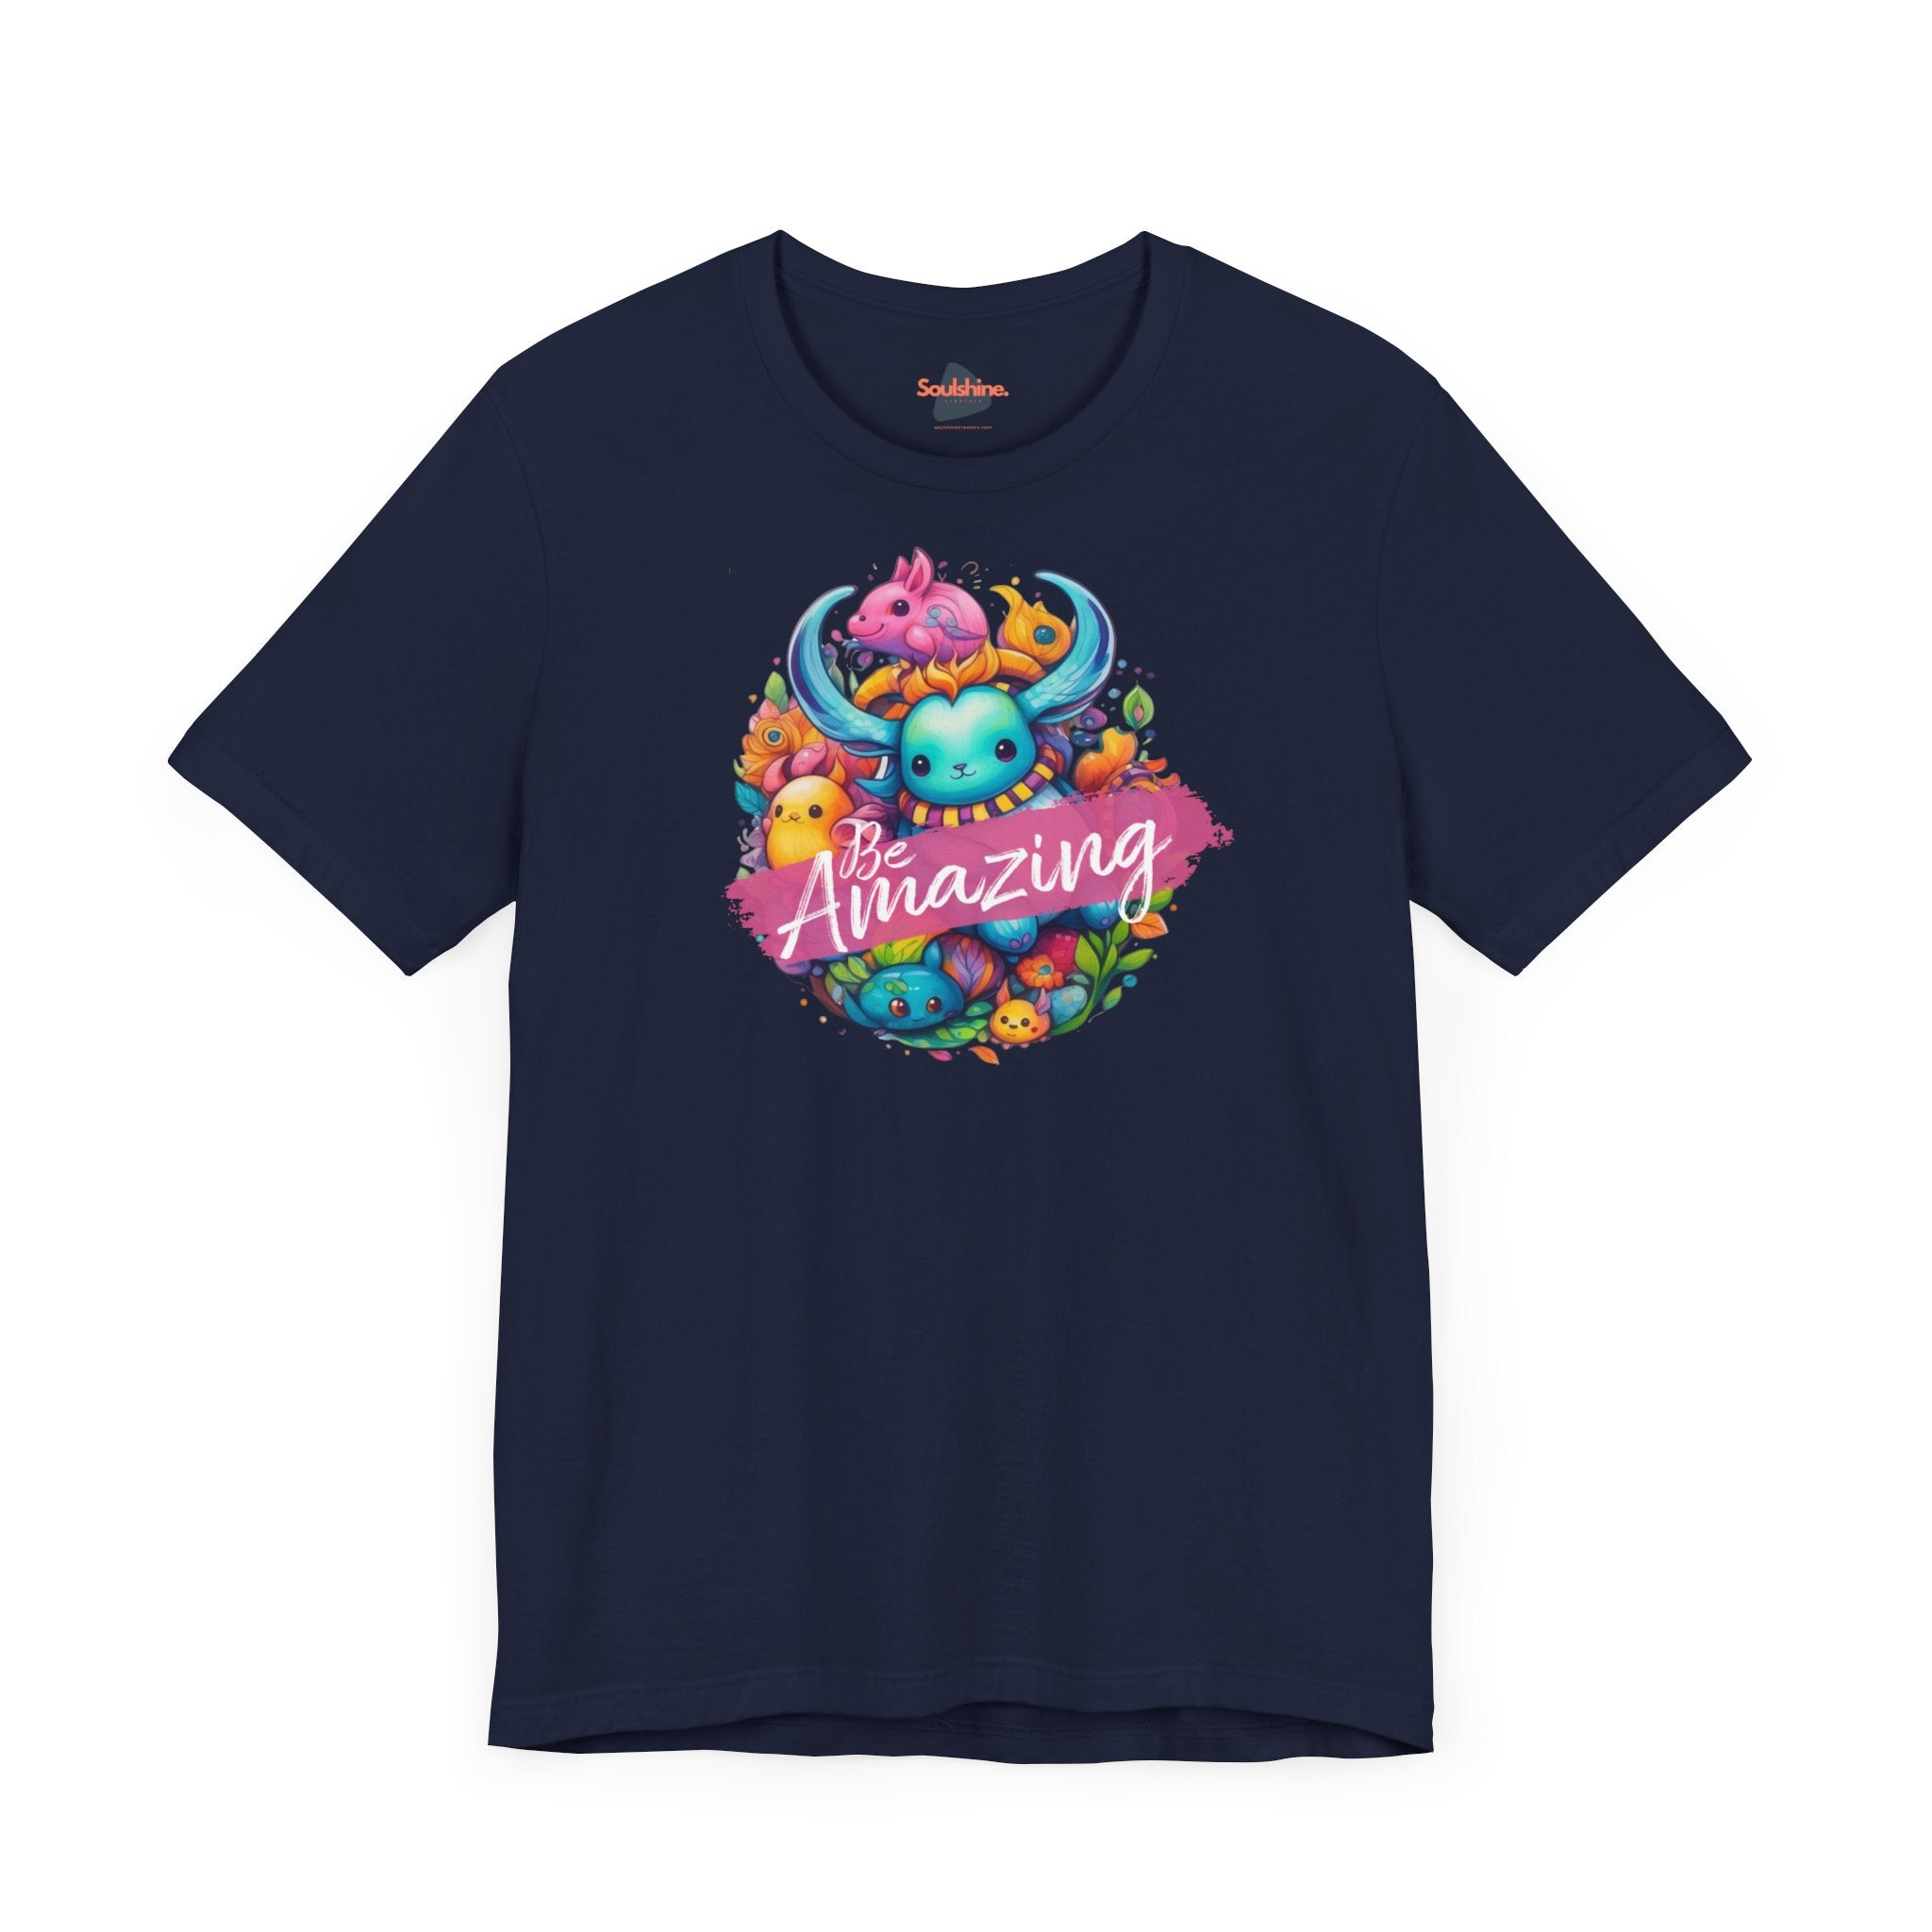 Printed navy ’Be Amazing’ T-shirt with colorful flowers by Soulshinecreators